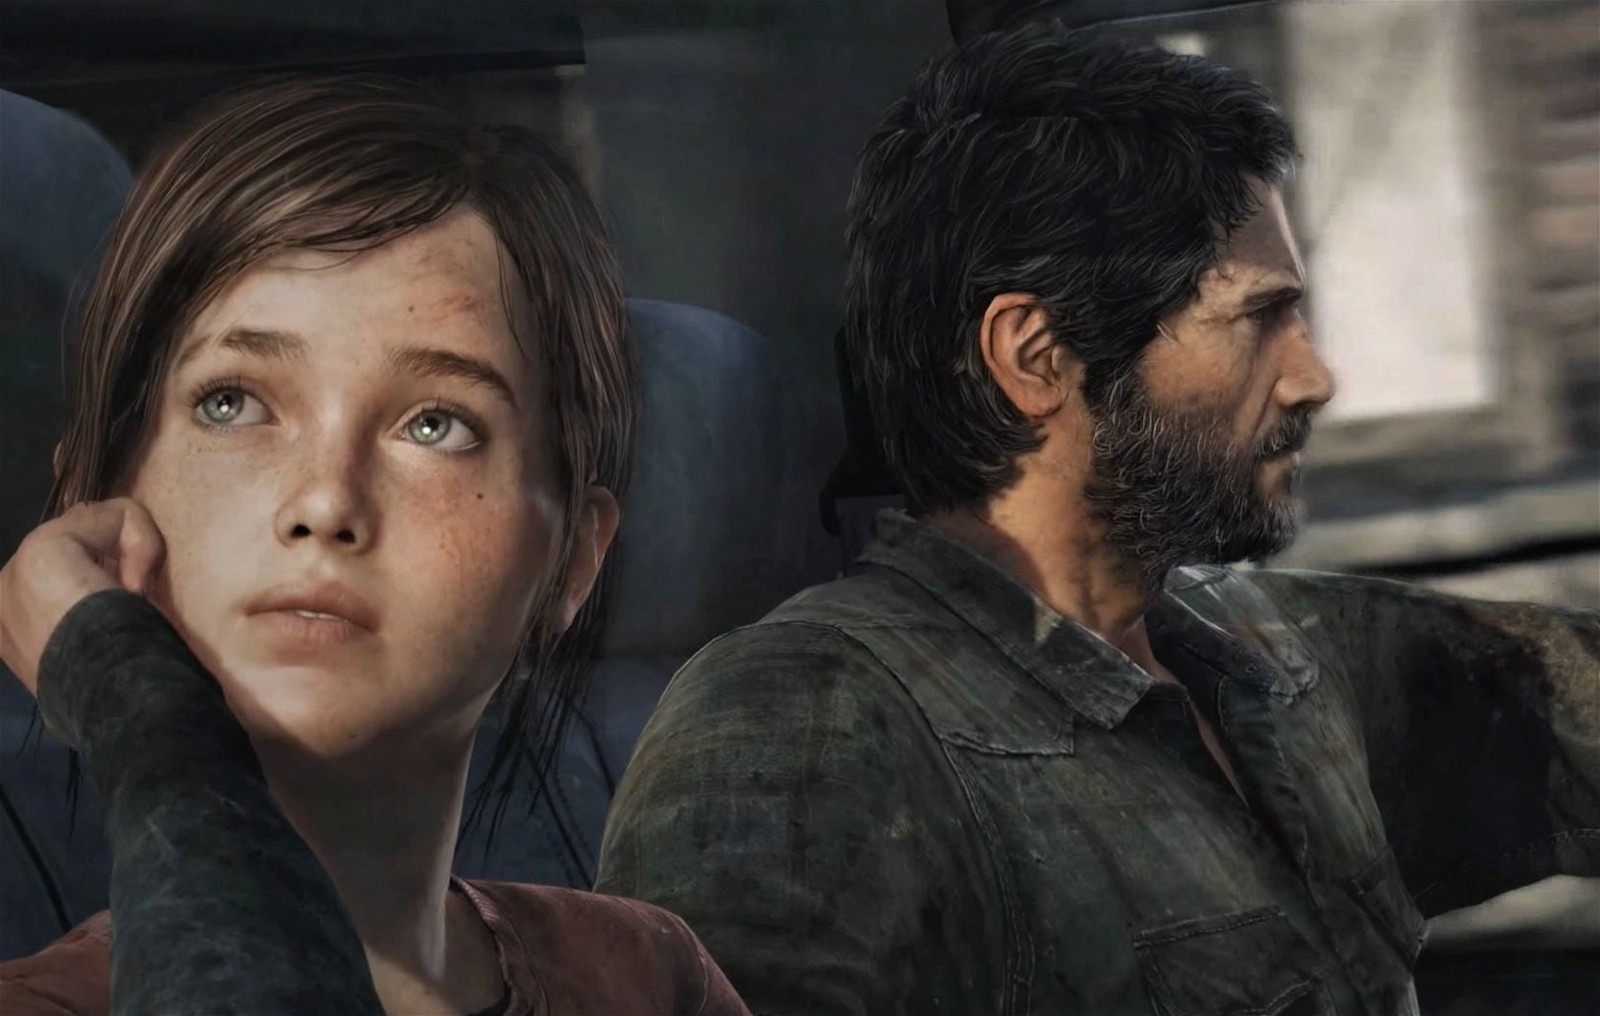 The first episode ended with a similar visual to The Last of Us game.